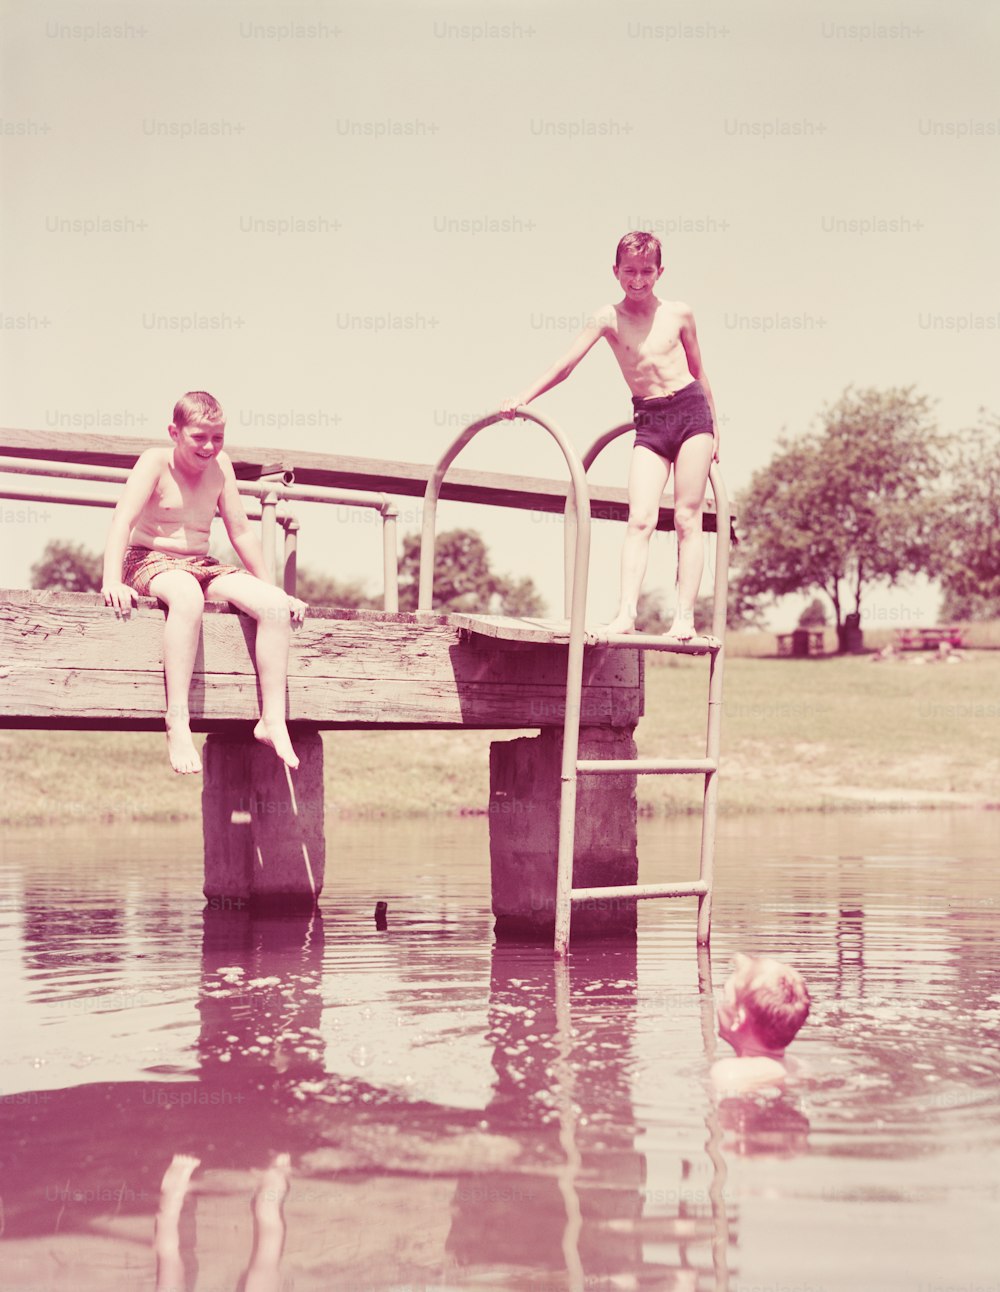 UNITED STATES - CIRCA 1950s:  Three boys at old swimming pond hole, one boy in water, one sitting on dock, one standing on ladder.